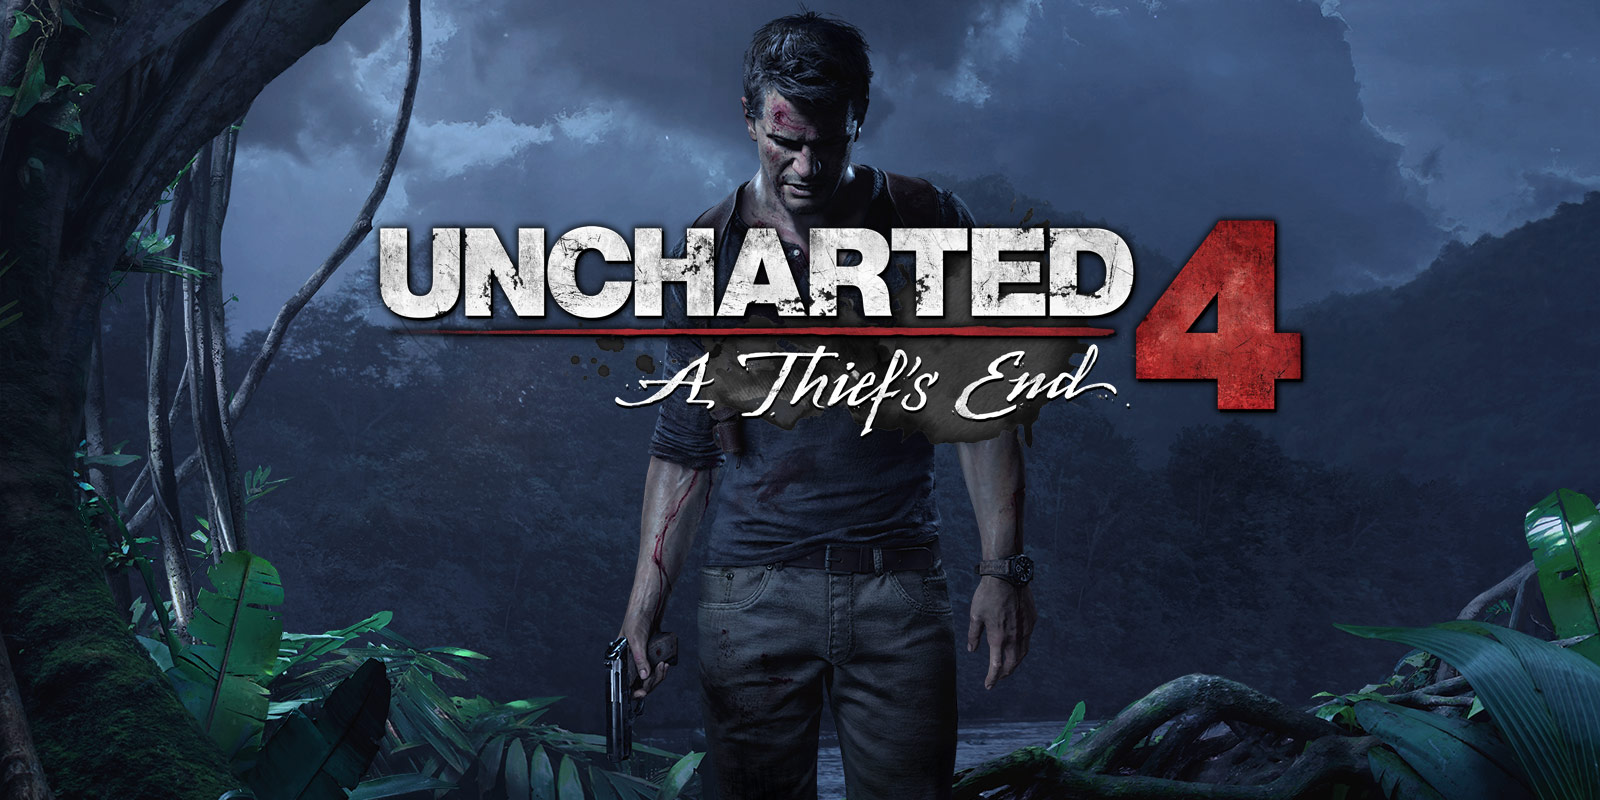 Uncharted 4: A Thief's Ends